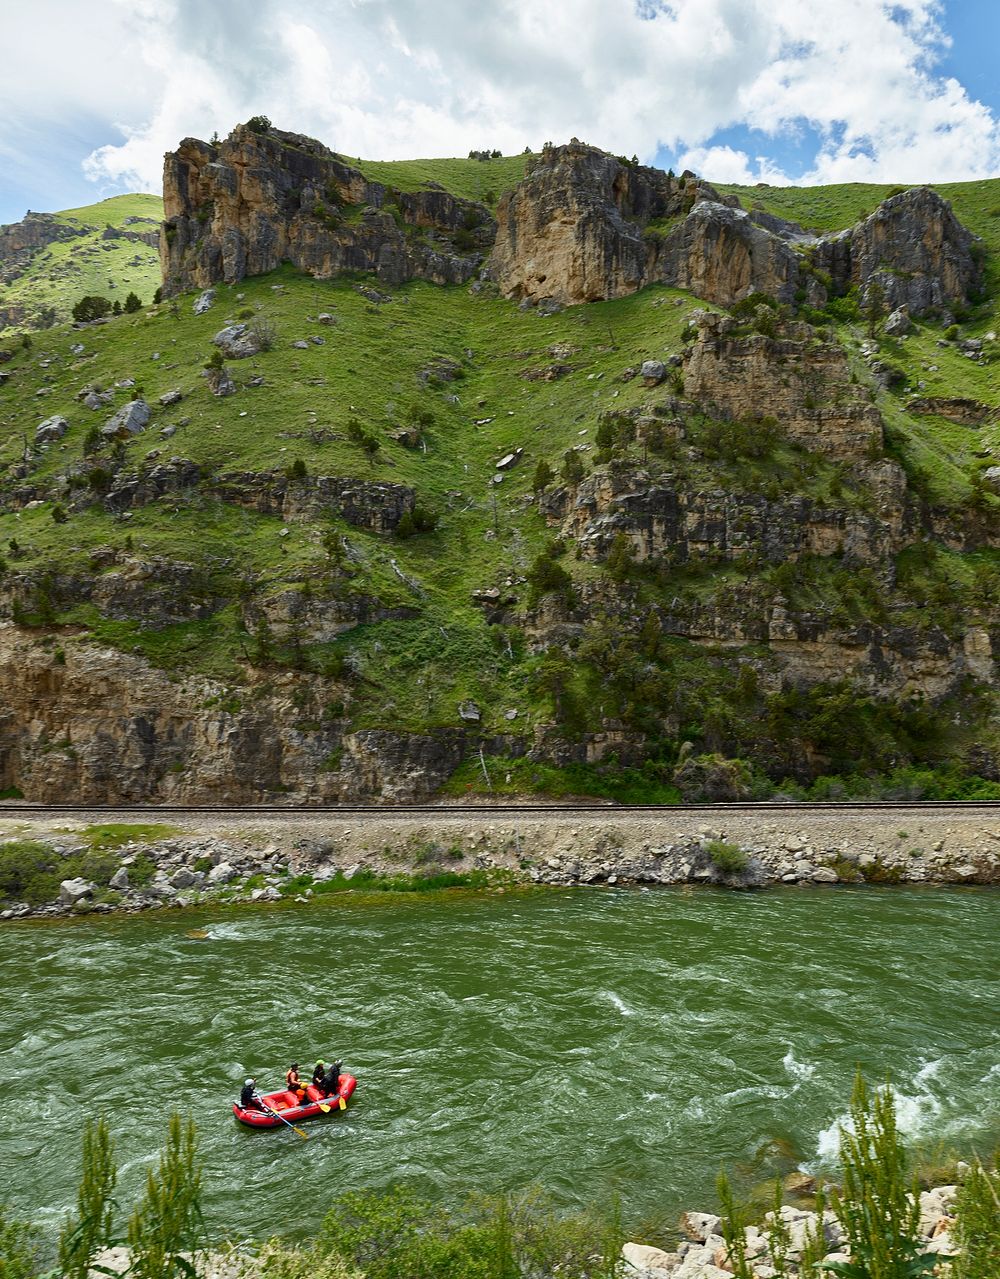 Rafters on the Bighorn River below Thermopolis, Wyoming. Original image from Carol M. Highsmith&rsquo;s America, Library of…